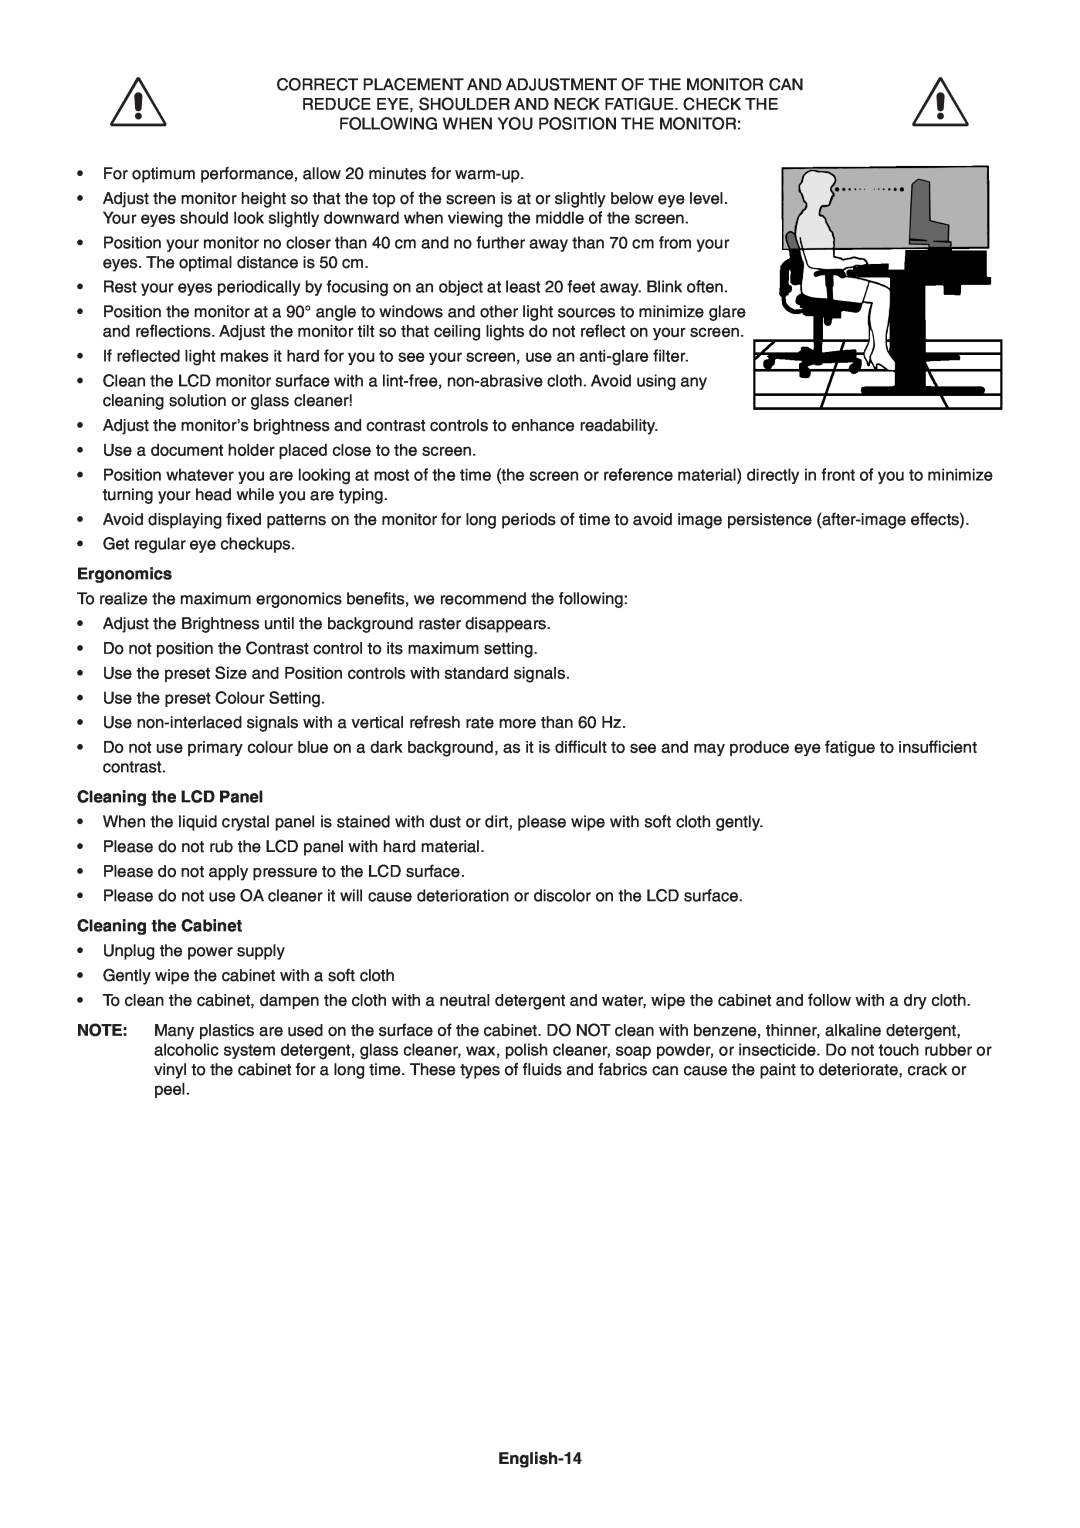 NEC LCD2690WUXi user manual Ergonomics, Cleaning the LCD Panel, Cleaning the Cabinet, English-14 